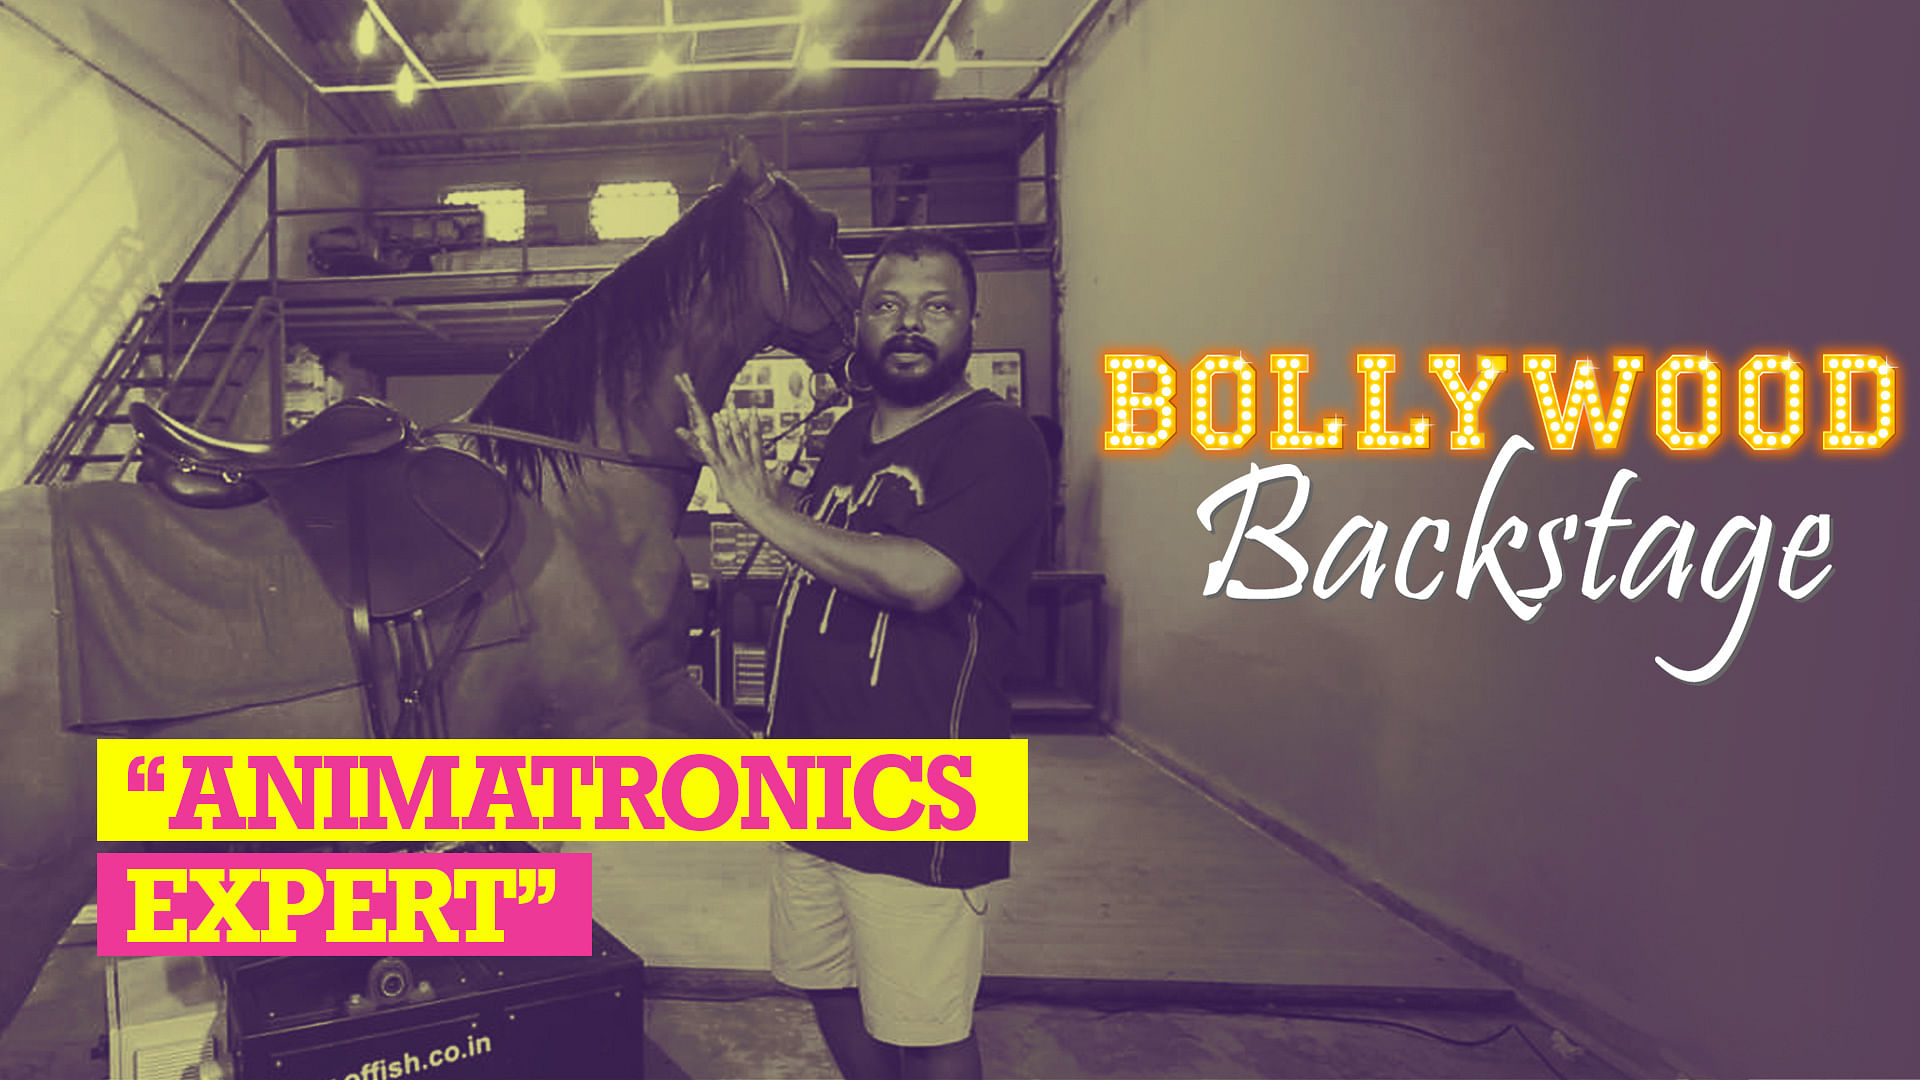 Prasun Basu talks about Animatronic Horses and how it’s being used in films now